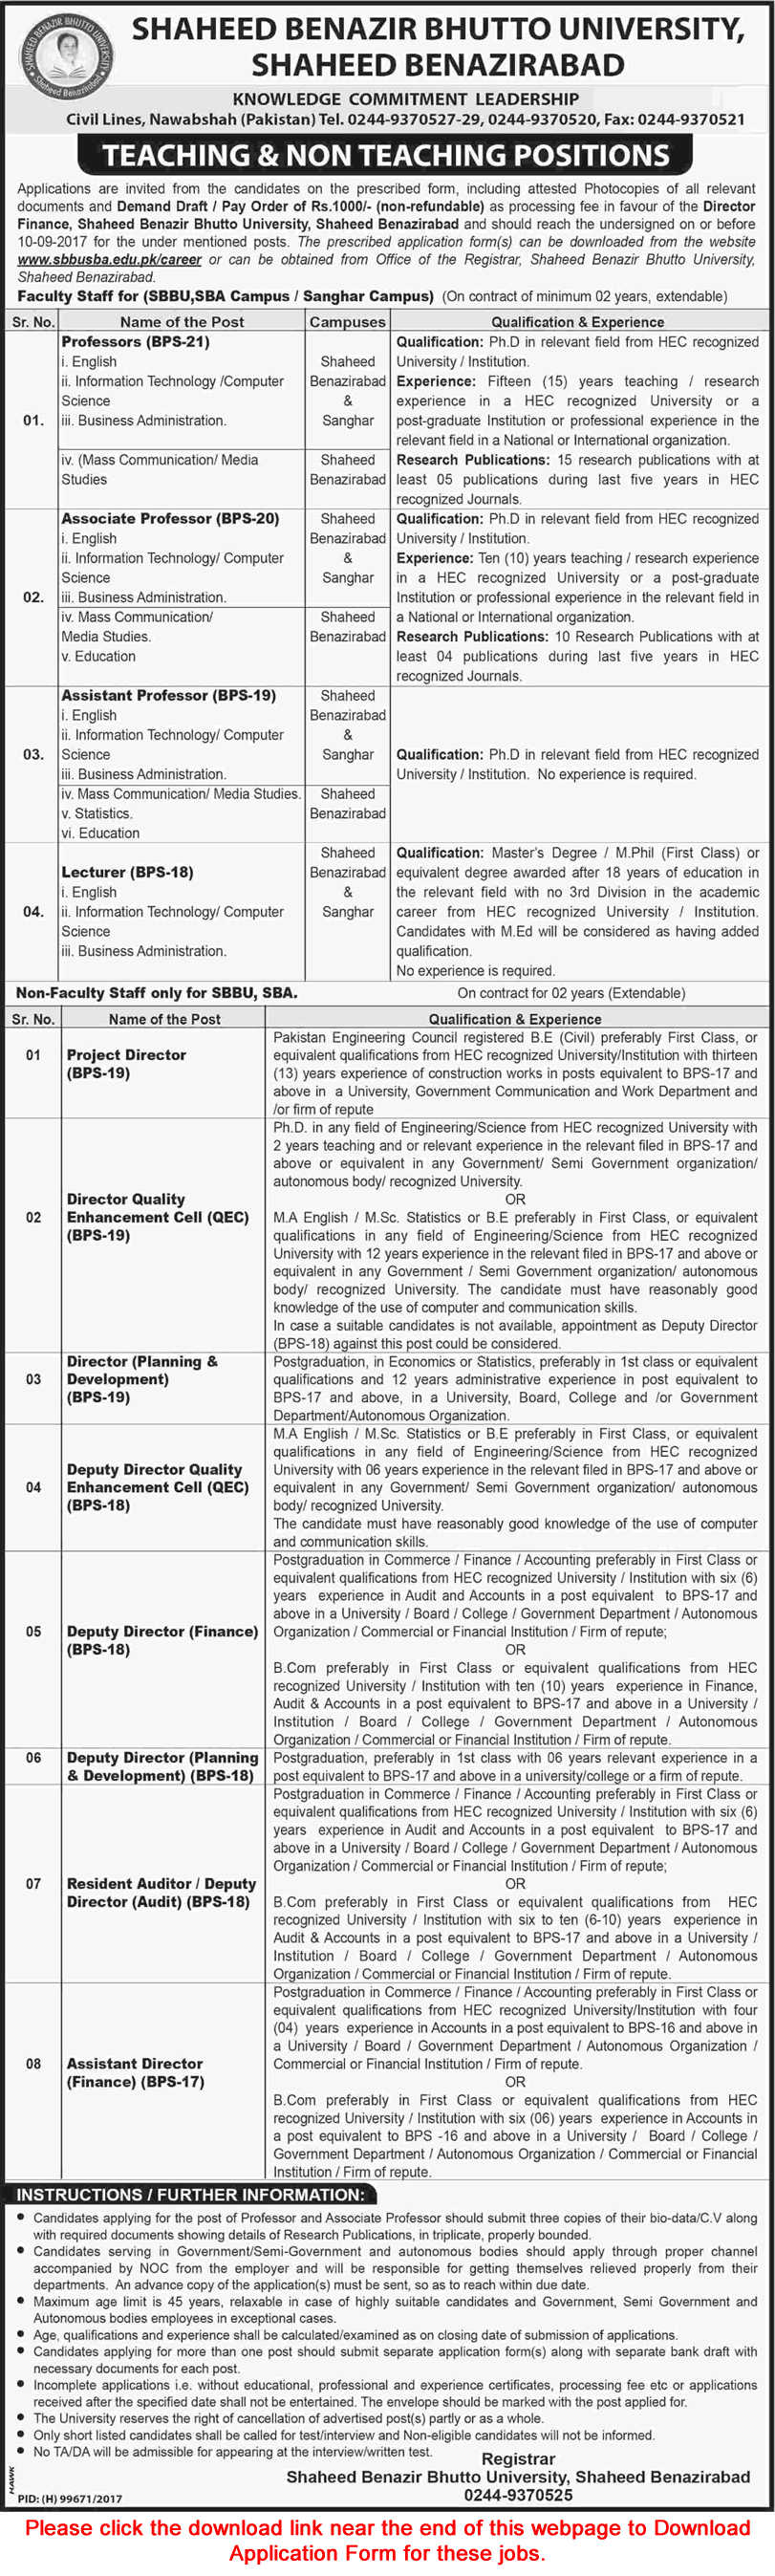 Shaheed Benazir Bhutto University Shaheed Benazirabad Jobs August 2017 Application Form Teaching Faculty & Others Latest